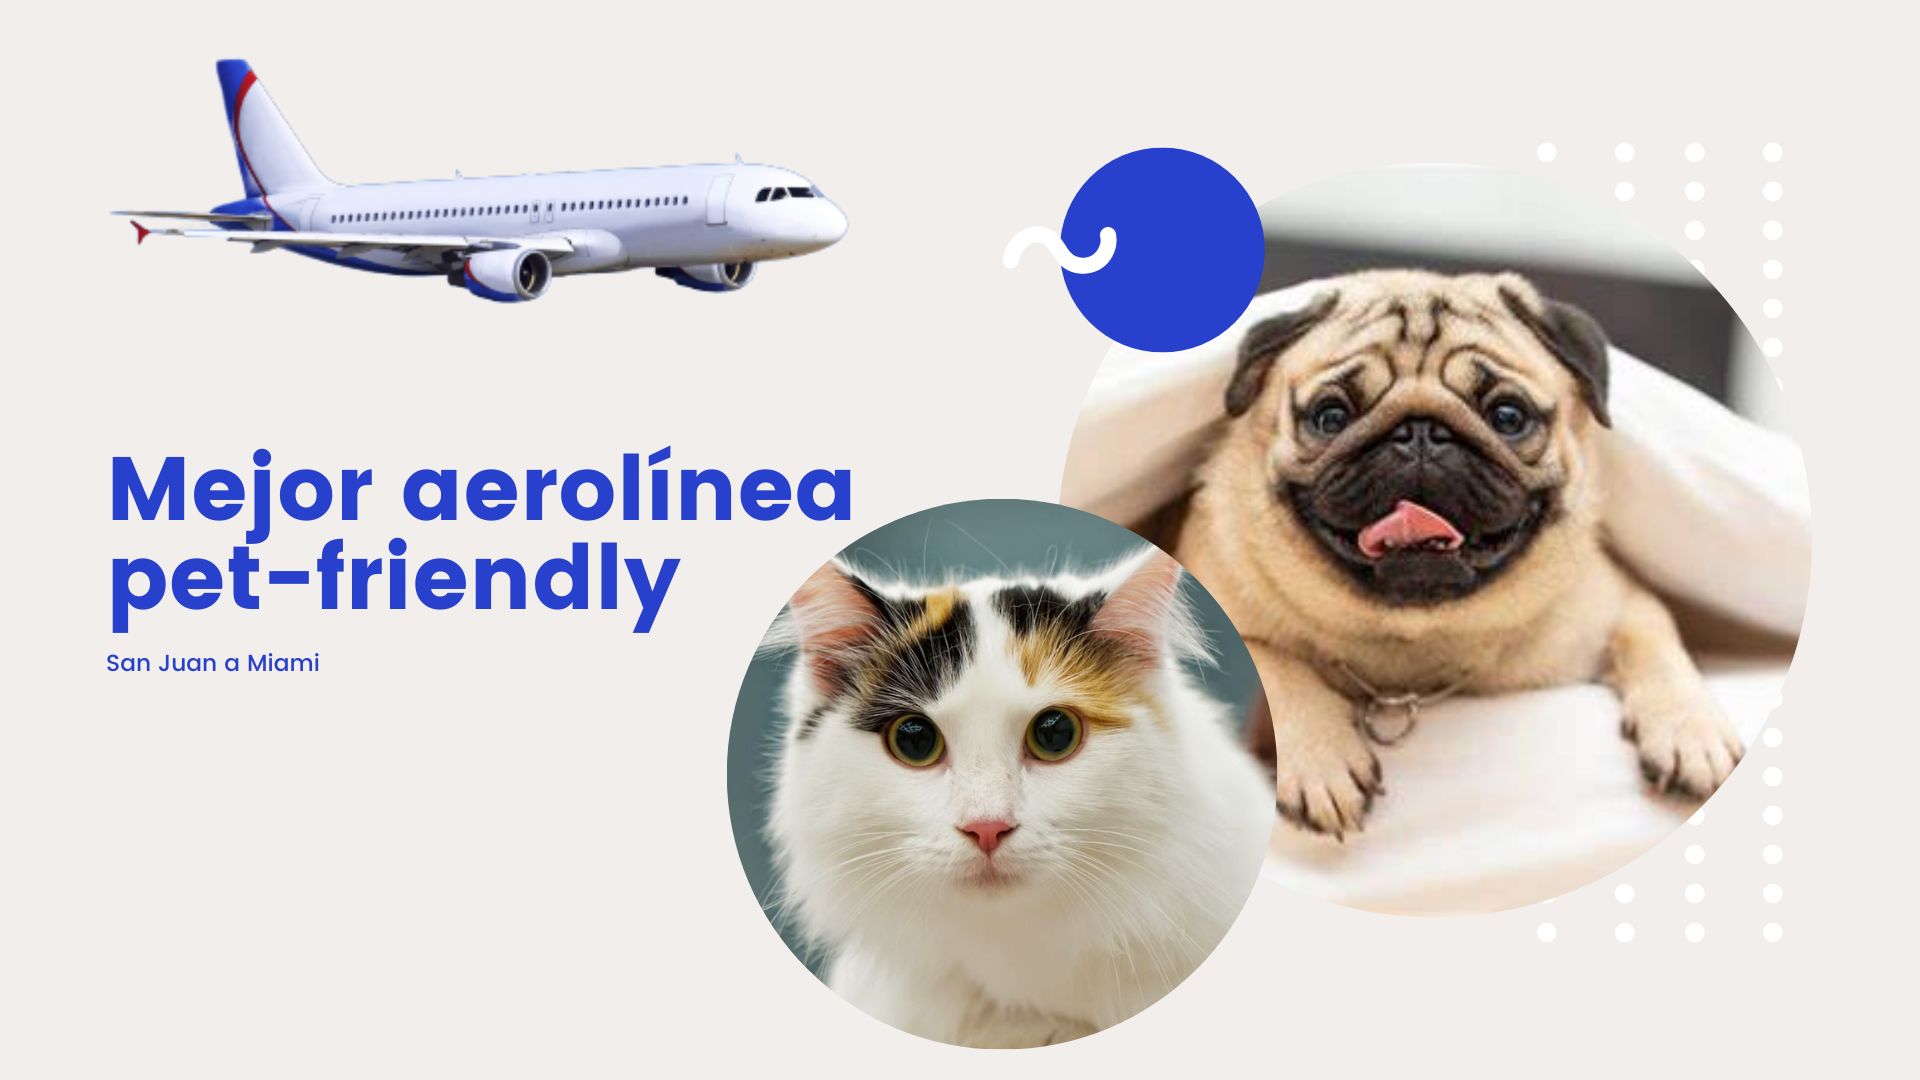 Best Pet-Friendly Airline from San Juan a Miami